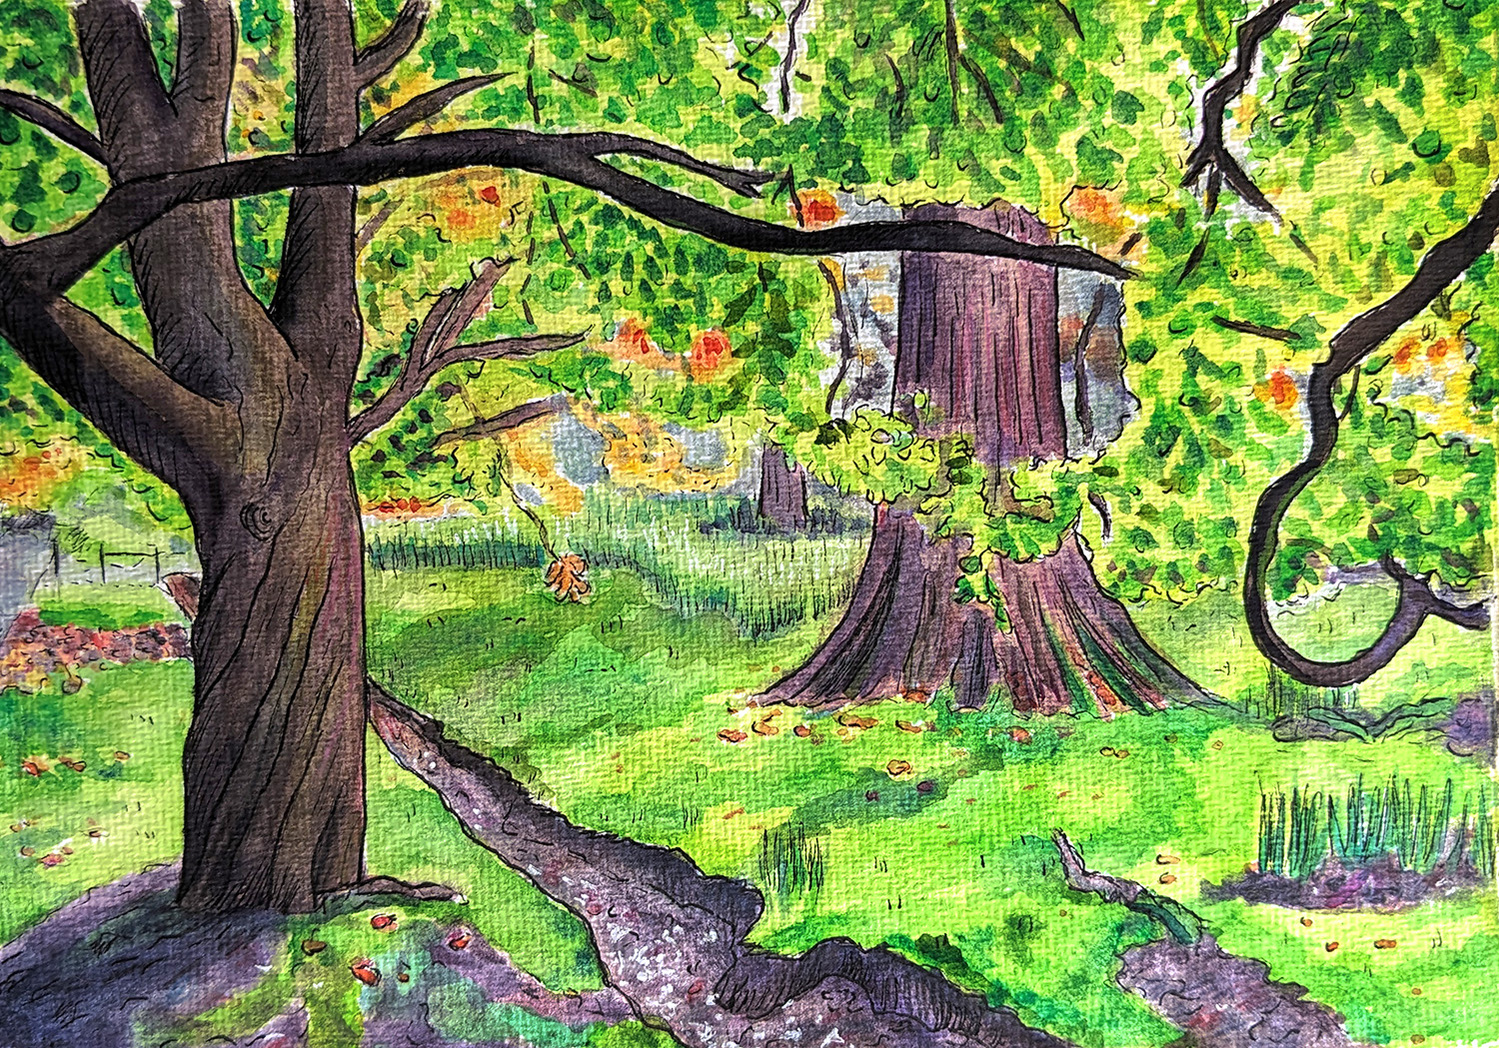 A painting of a dry stream bed going through an open green woodland. Two twisted tree trunks are visible, the leaves are mostly light green but are starting to turn gold and orange at the end of the branches.